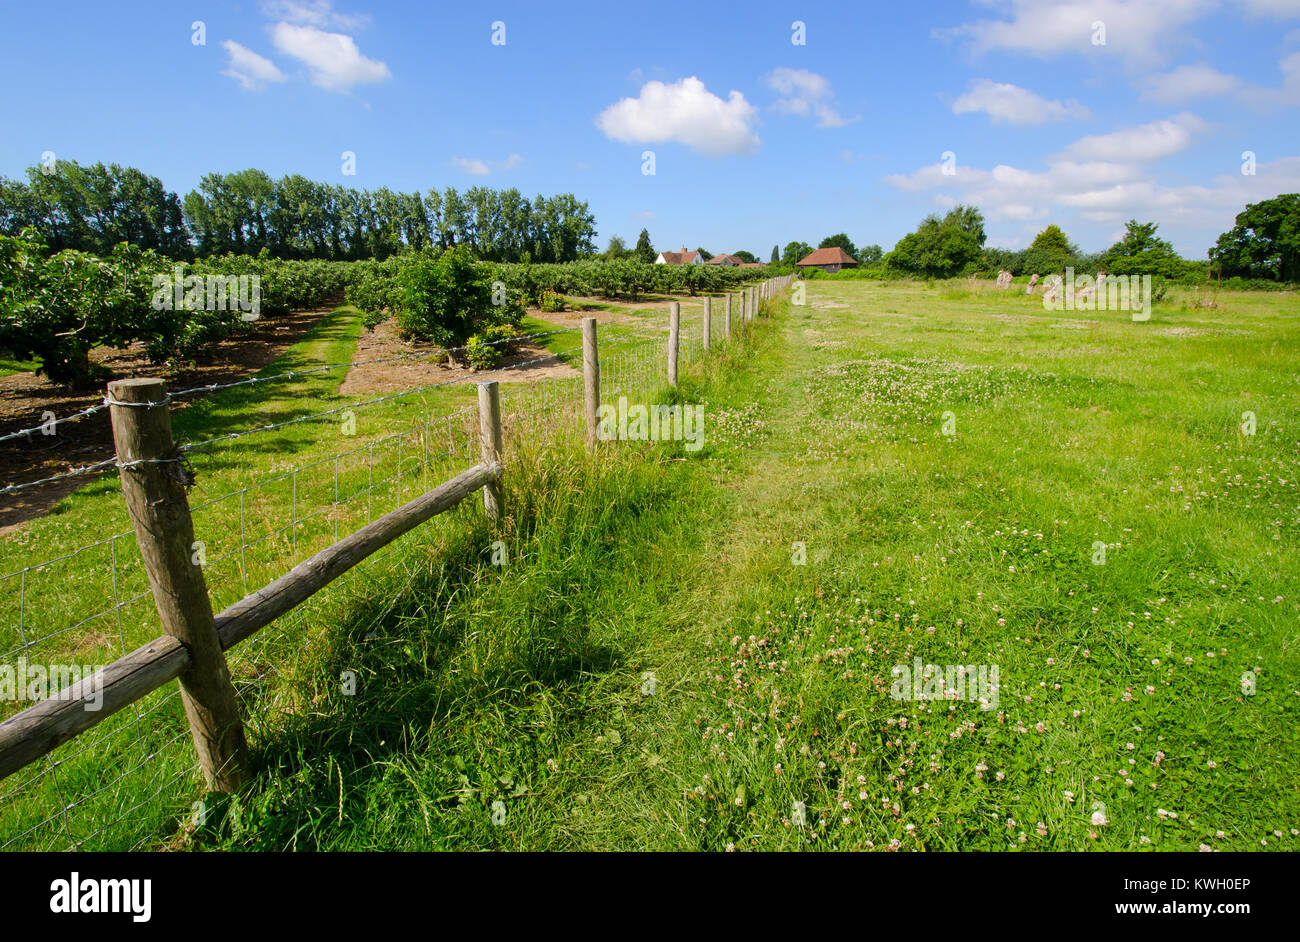 Boughton Monchelsea village, Kent, England. Fields, trees and fence. Stock Photo